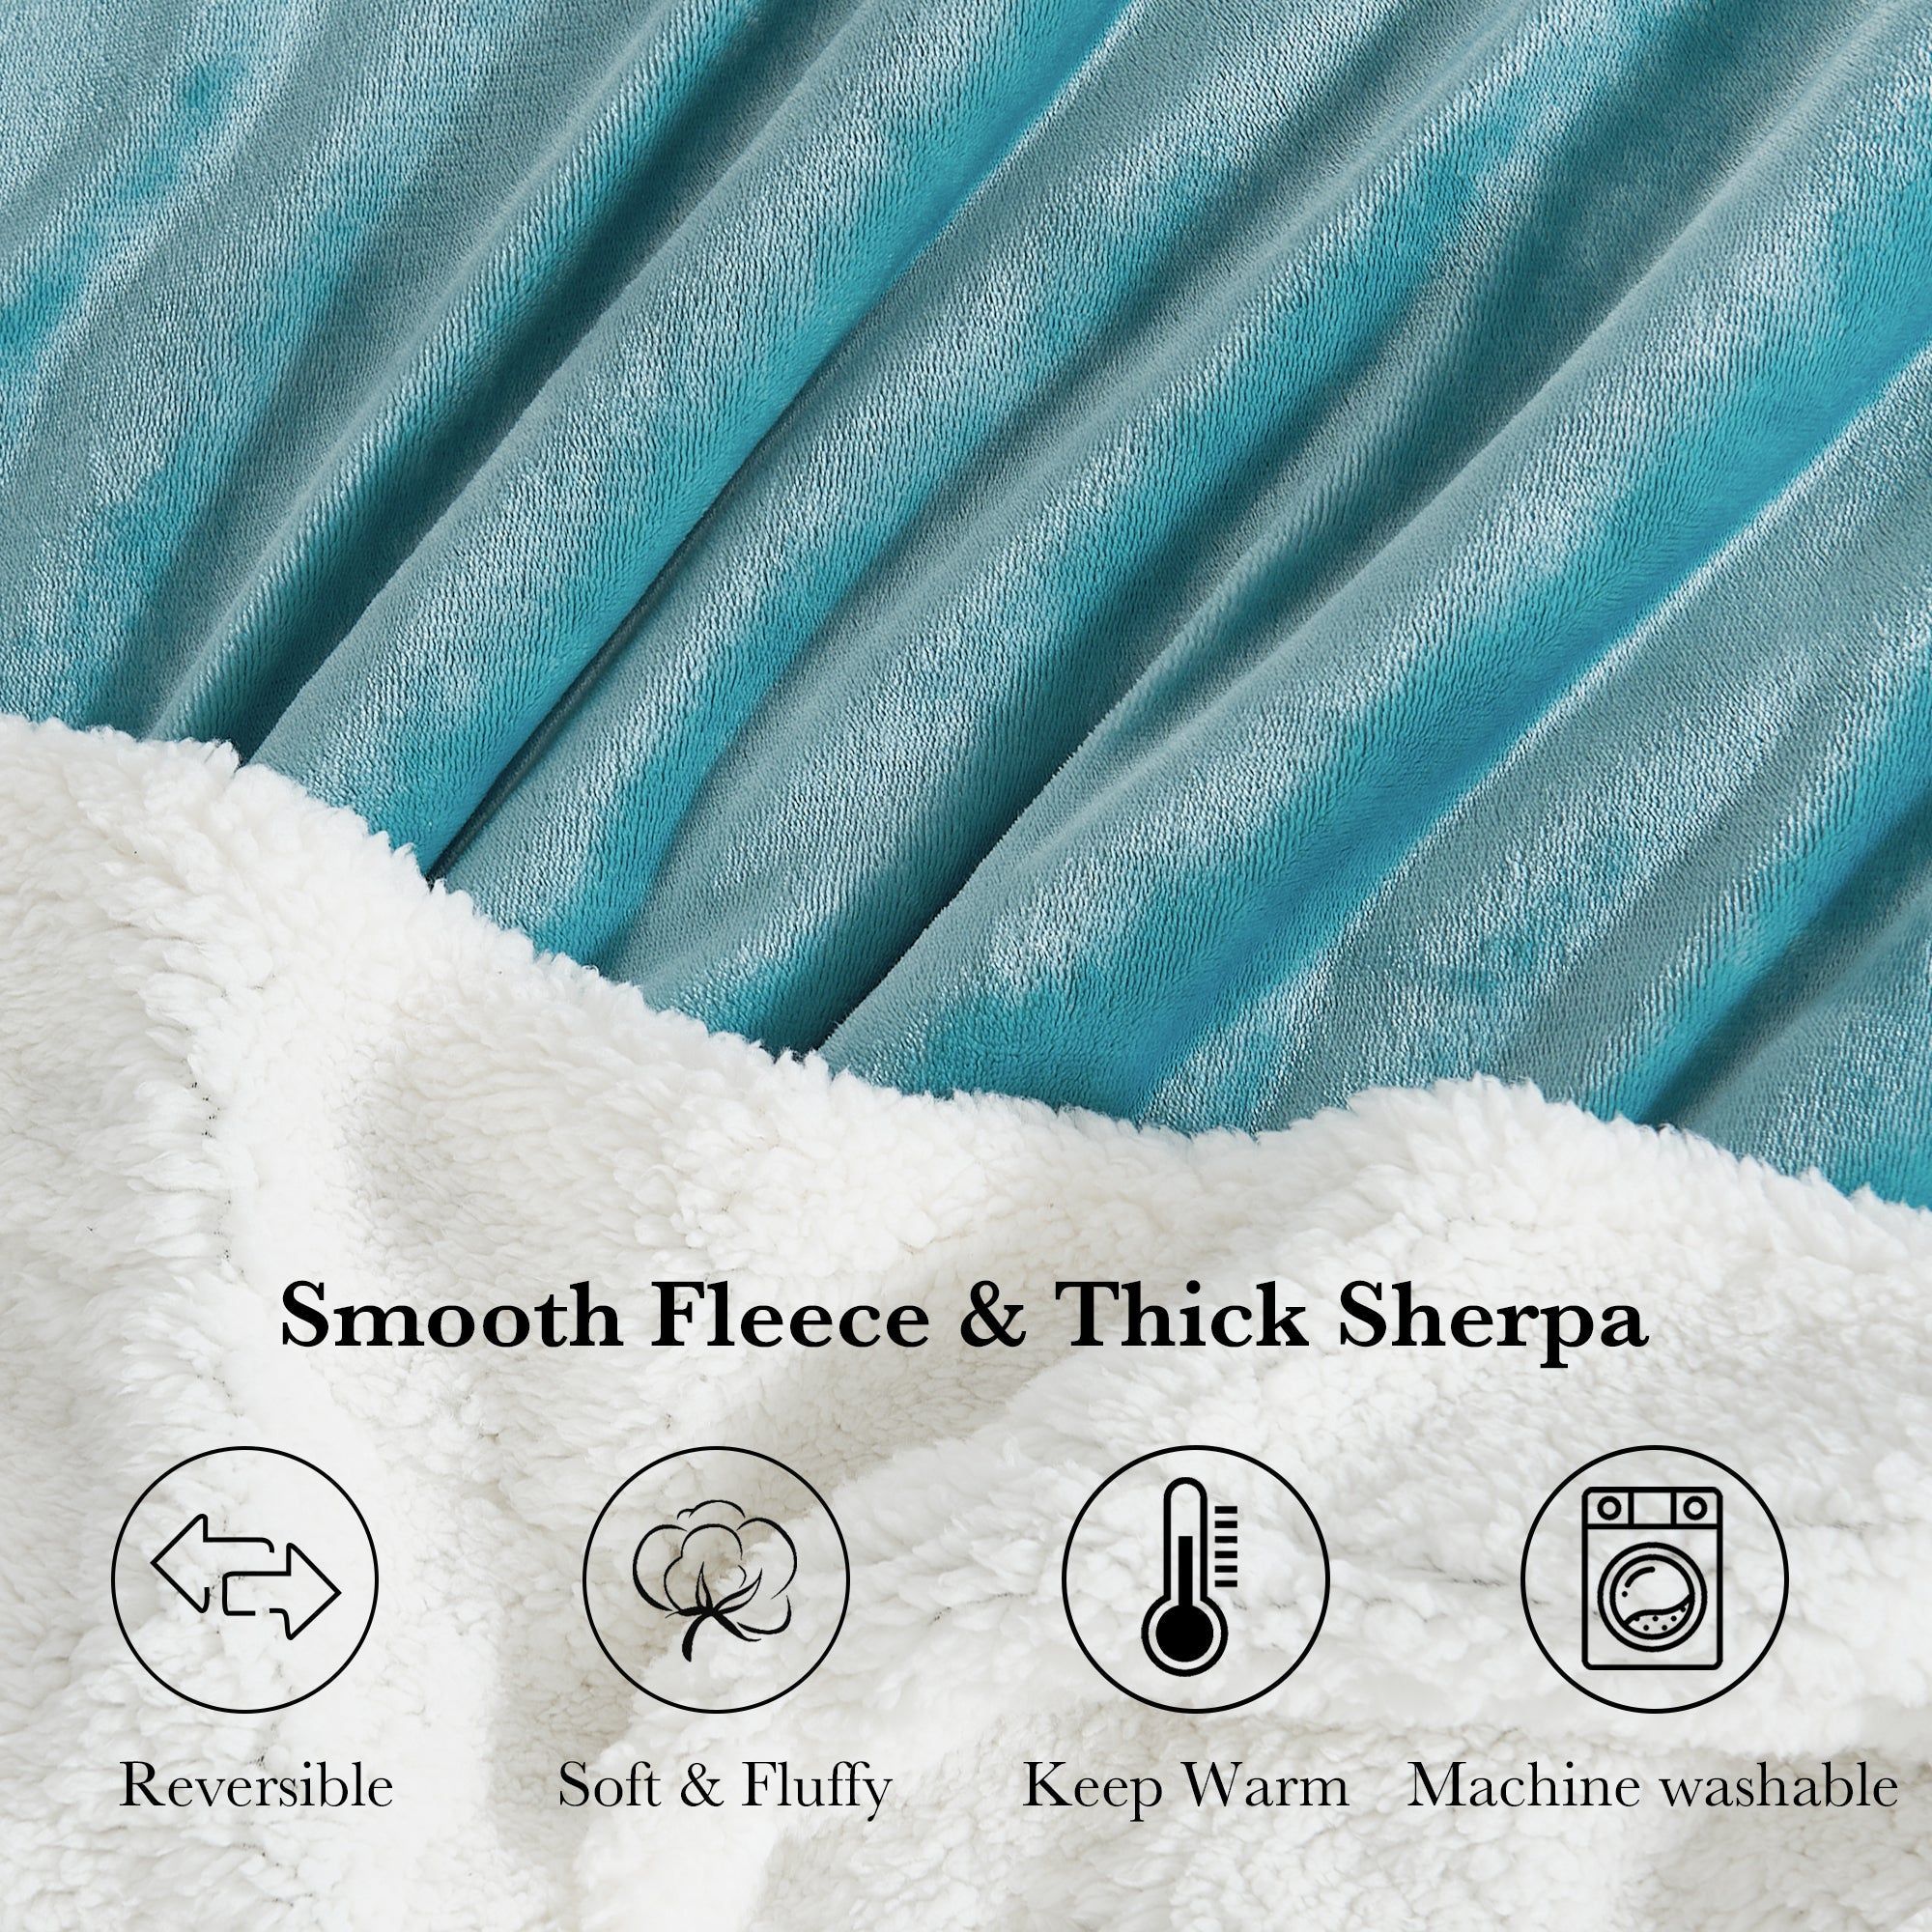 KGORGE Dual Sided Warm Thick Plush Blankets Super Soft Sherpa Blanket for Bed Sofa Chair Travel KGORGE Store